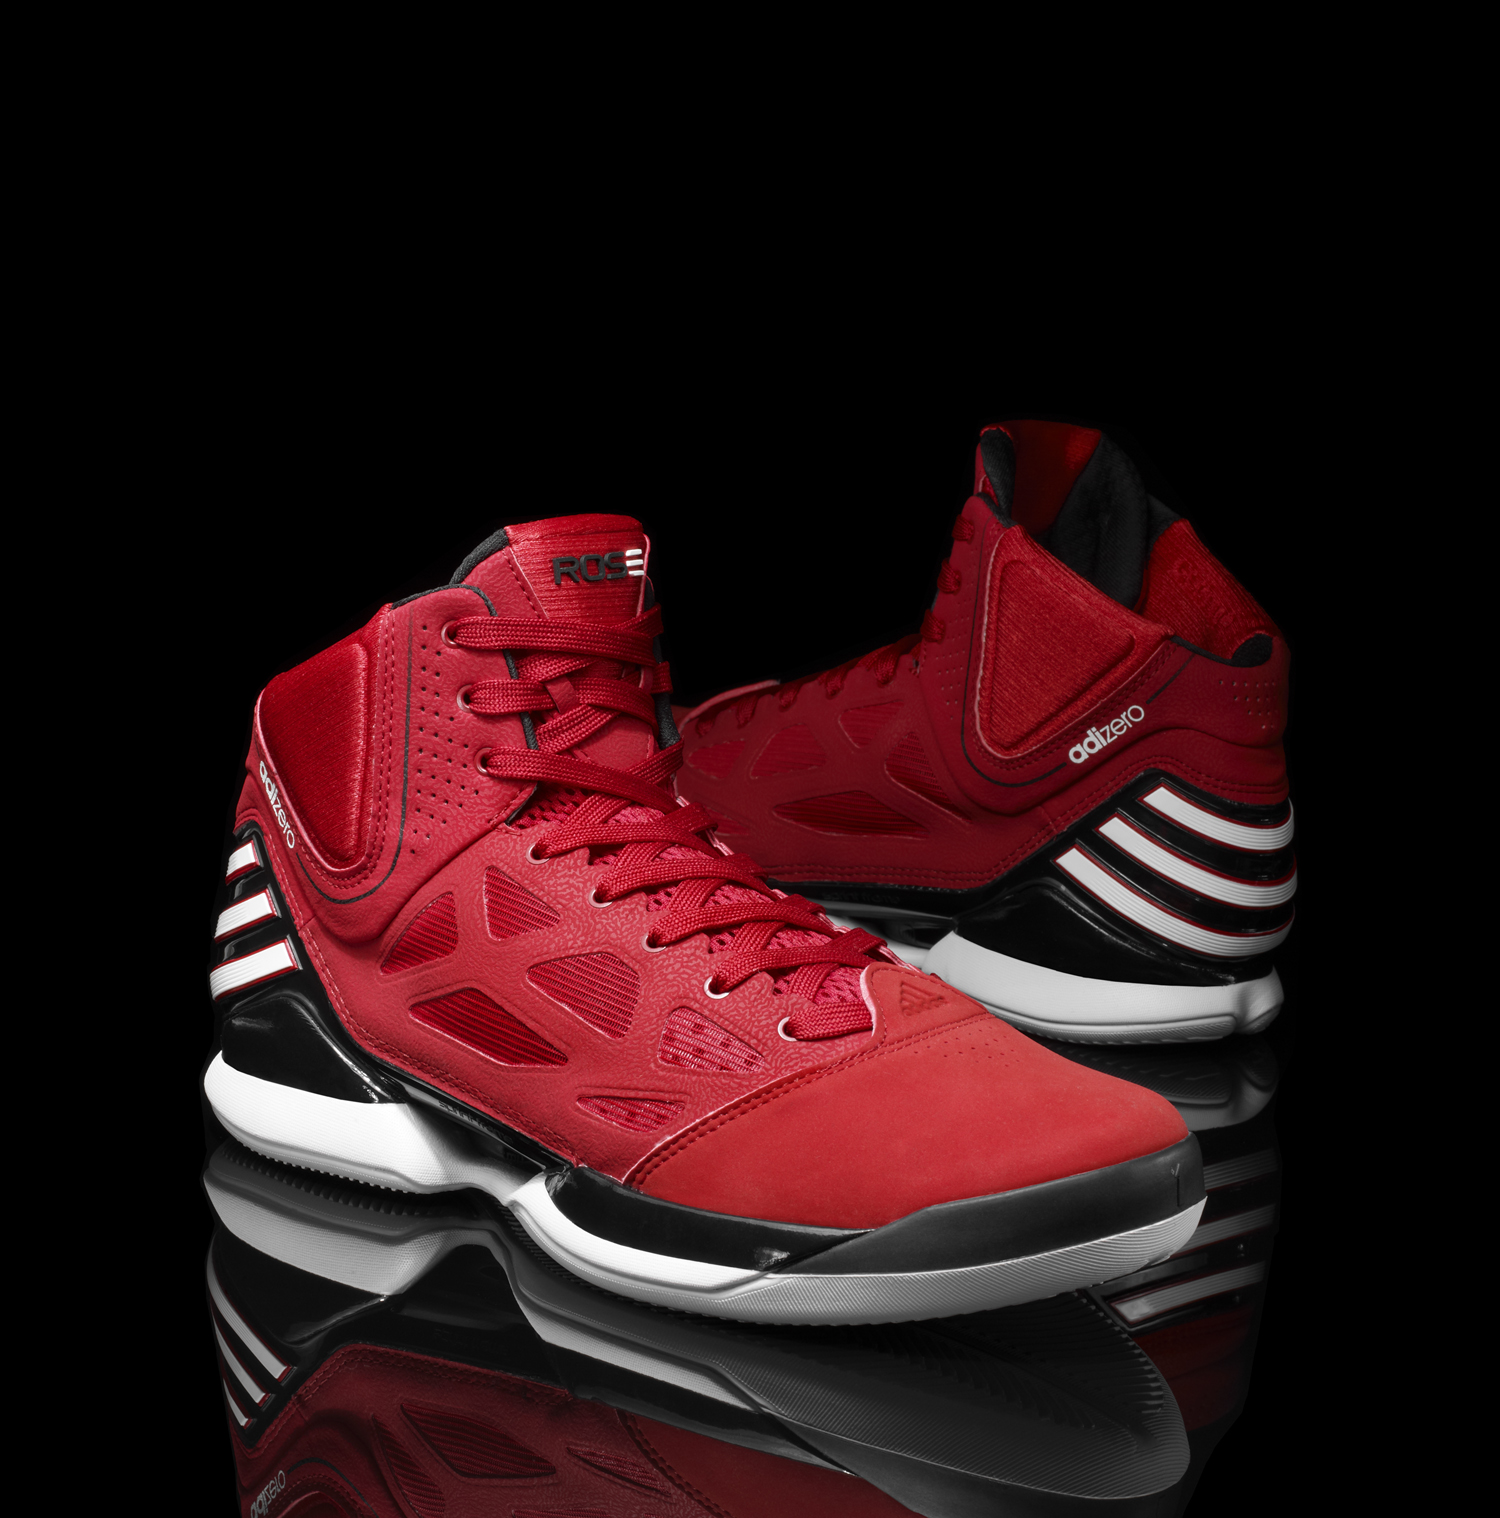 Derrick Rose adidas Shoes - All-Star 2019 Colors